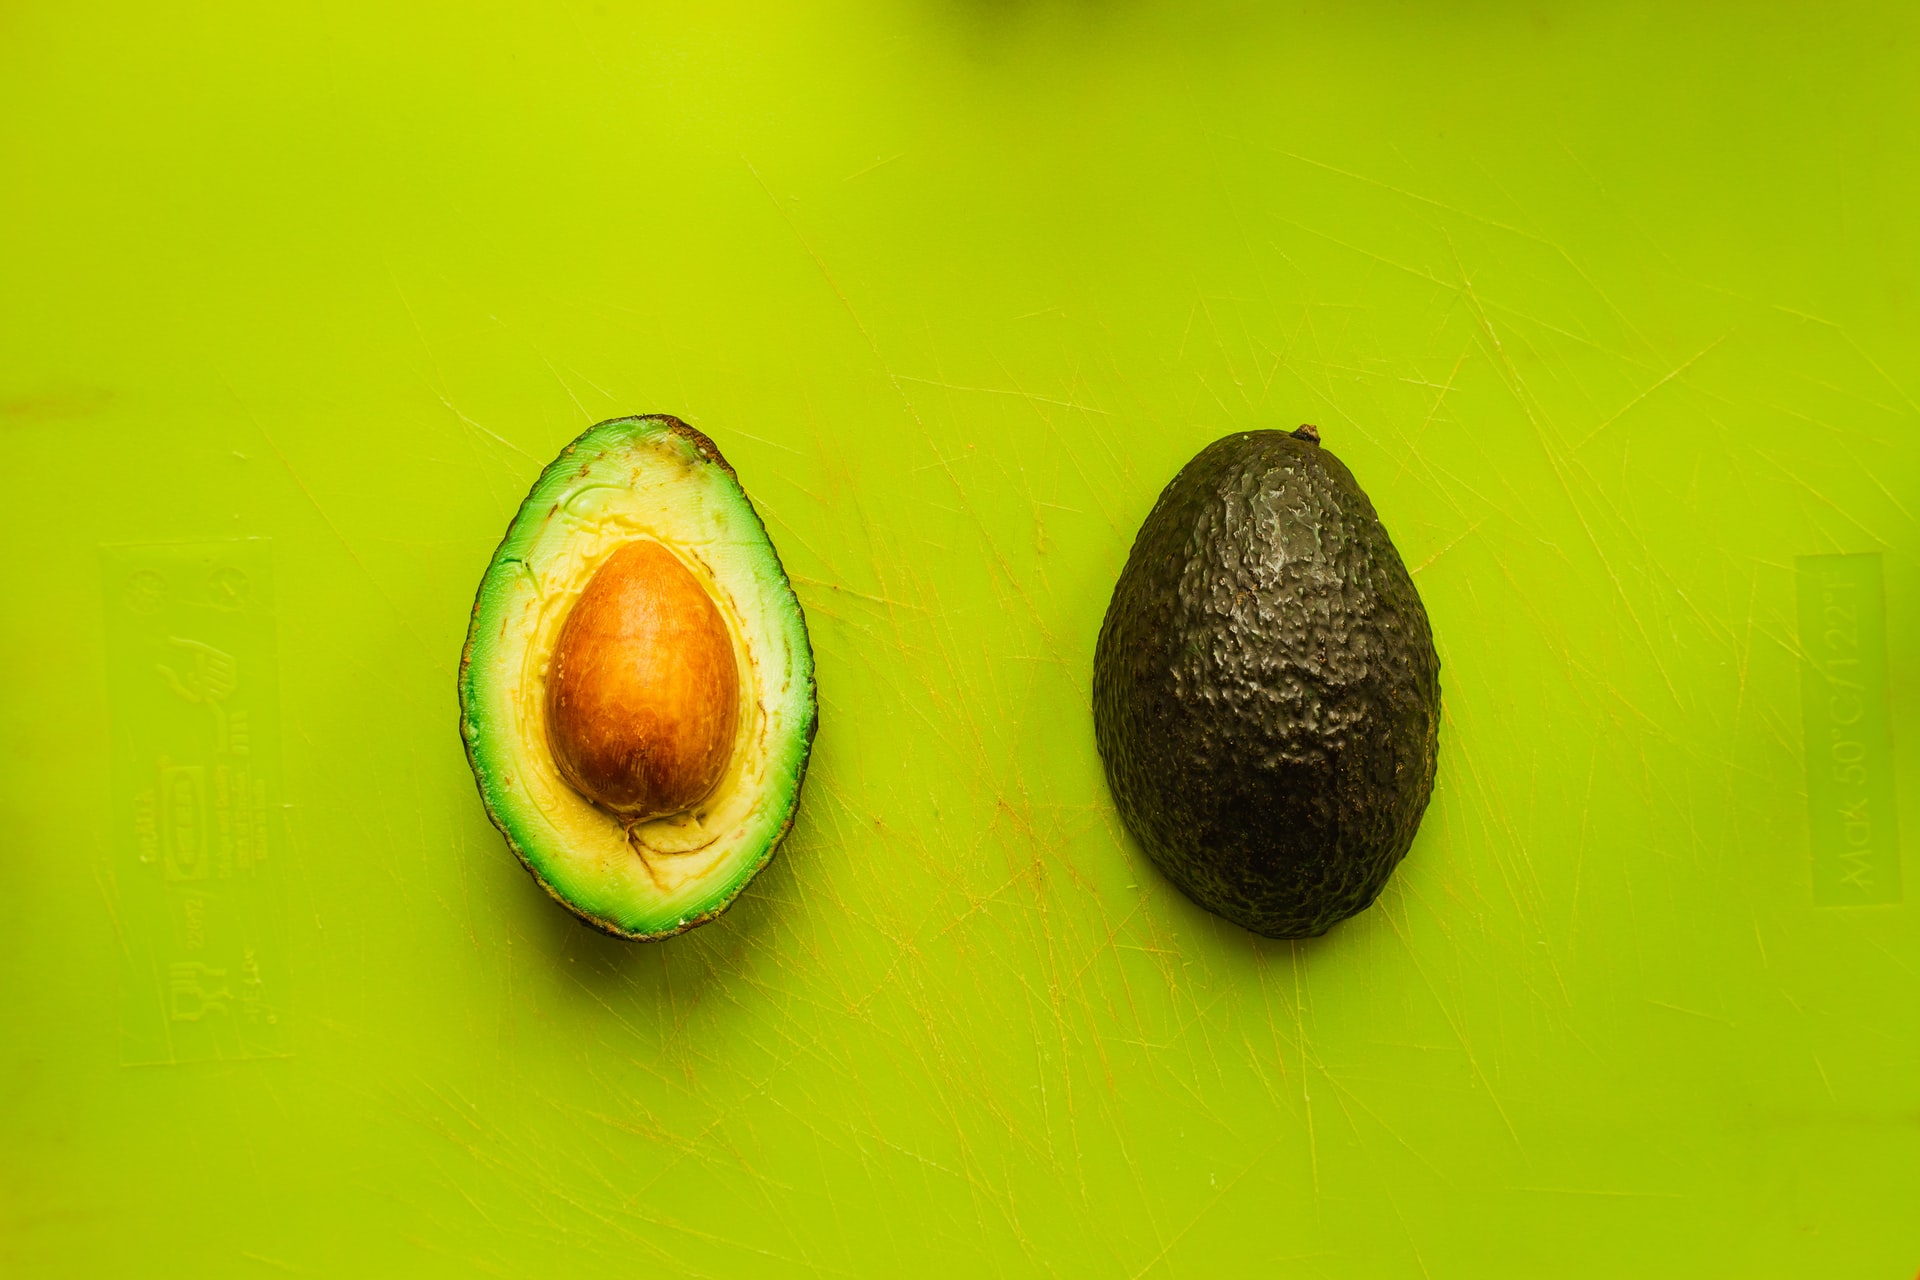 How to Plant Your First Avocado During Quarantine 9